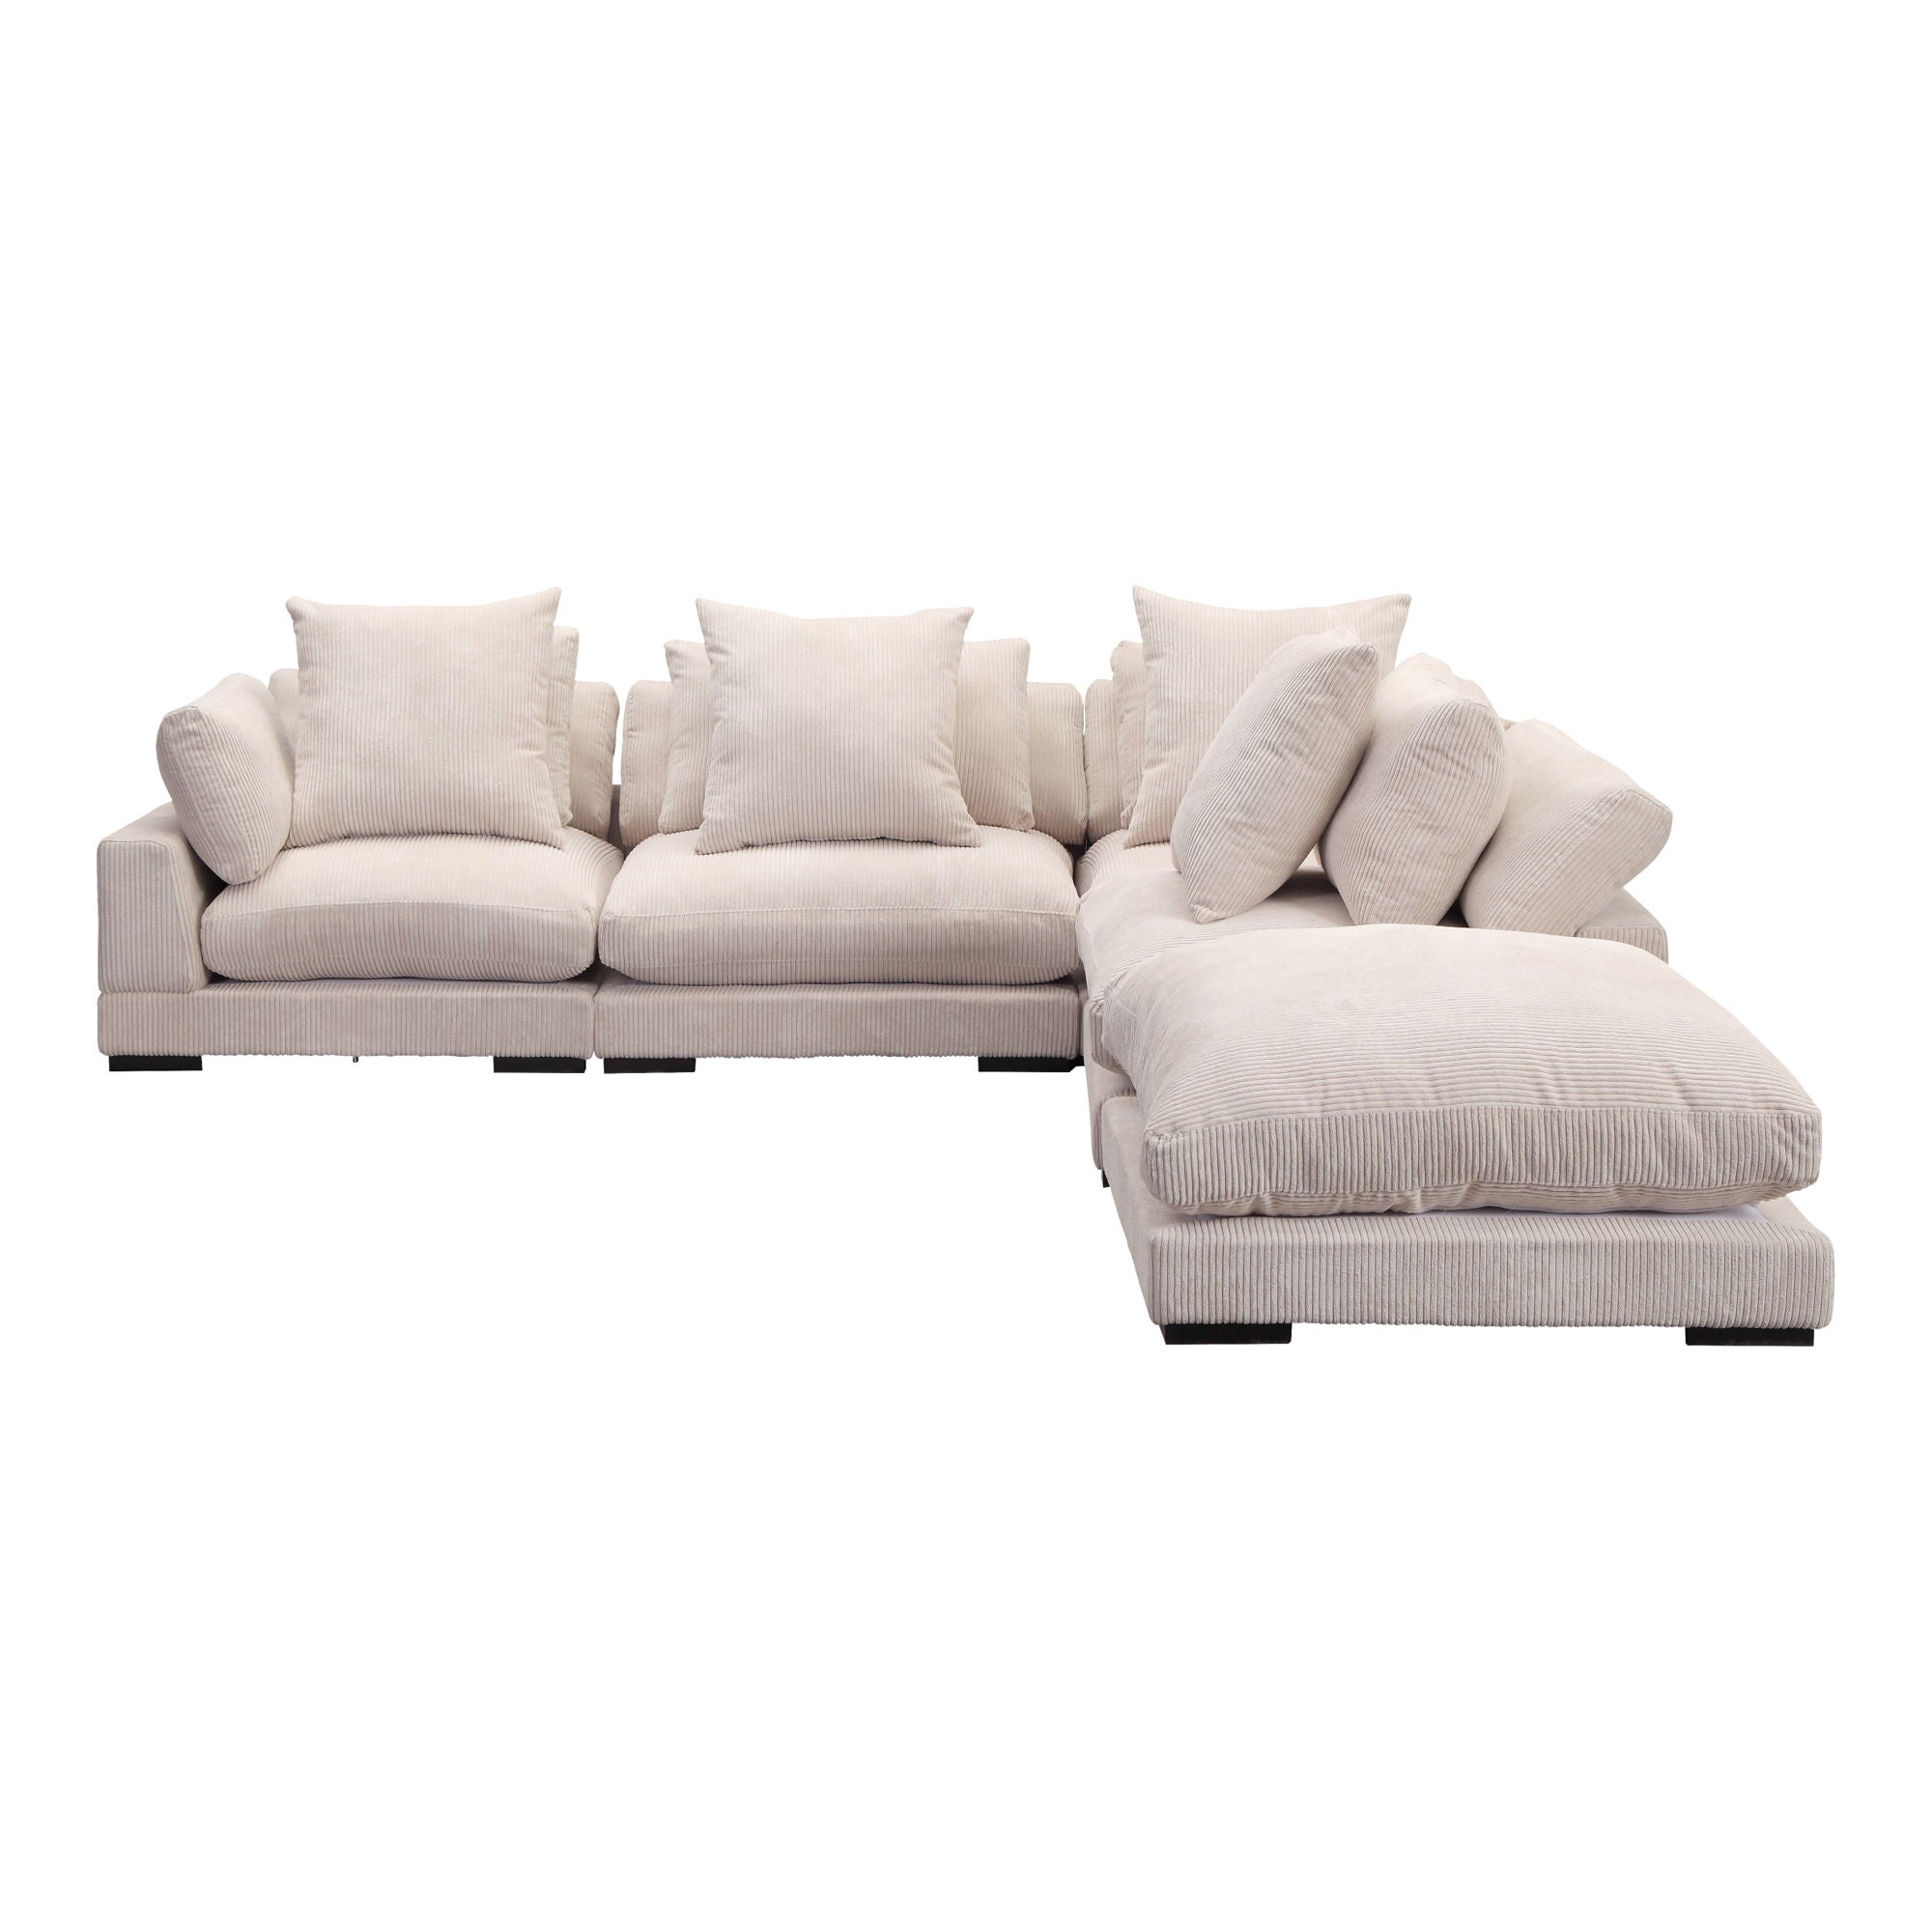 White Corduroy Sectional - Modular, Tumble Dream-Stationary Sectionals-American Furniture Outlet